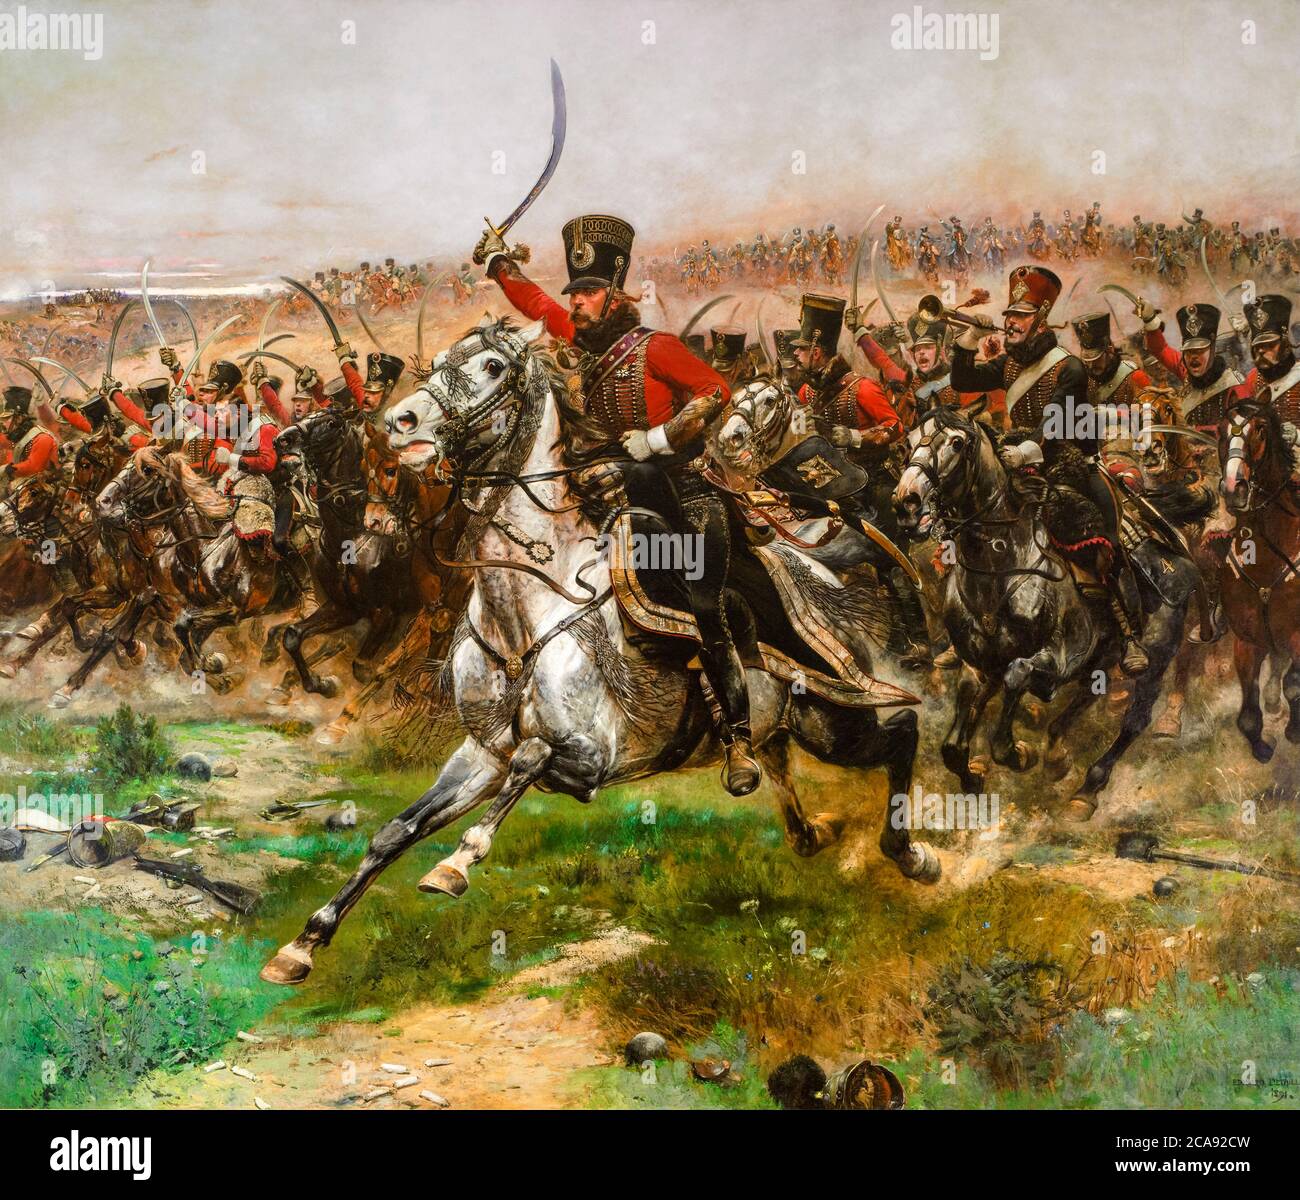 Vive L'Empereur, (French 4th Hussar cavalry charge at the Battle of Friedland, June 14th 1807), painting by Jean-Baptiste Édouard Detaille, 1891 Stock Photo